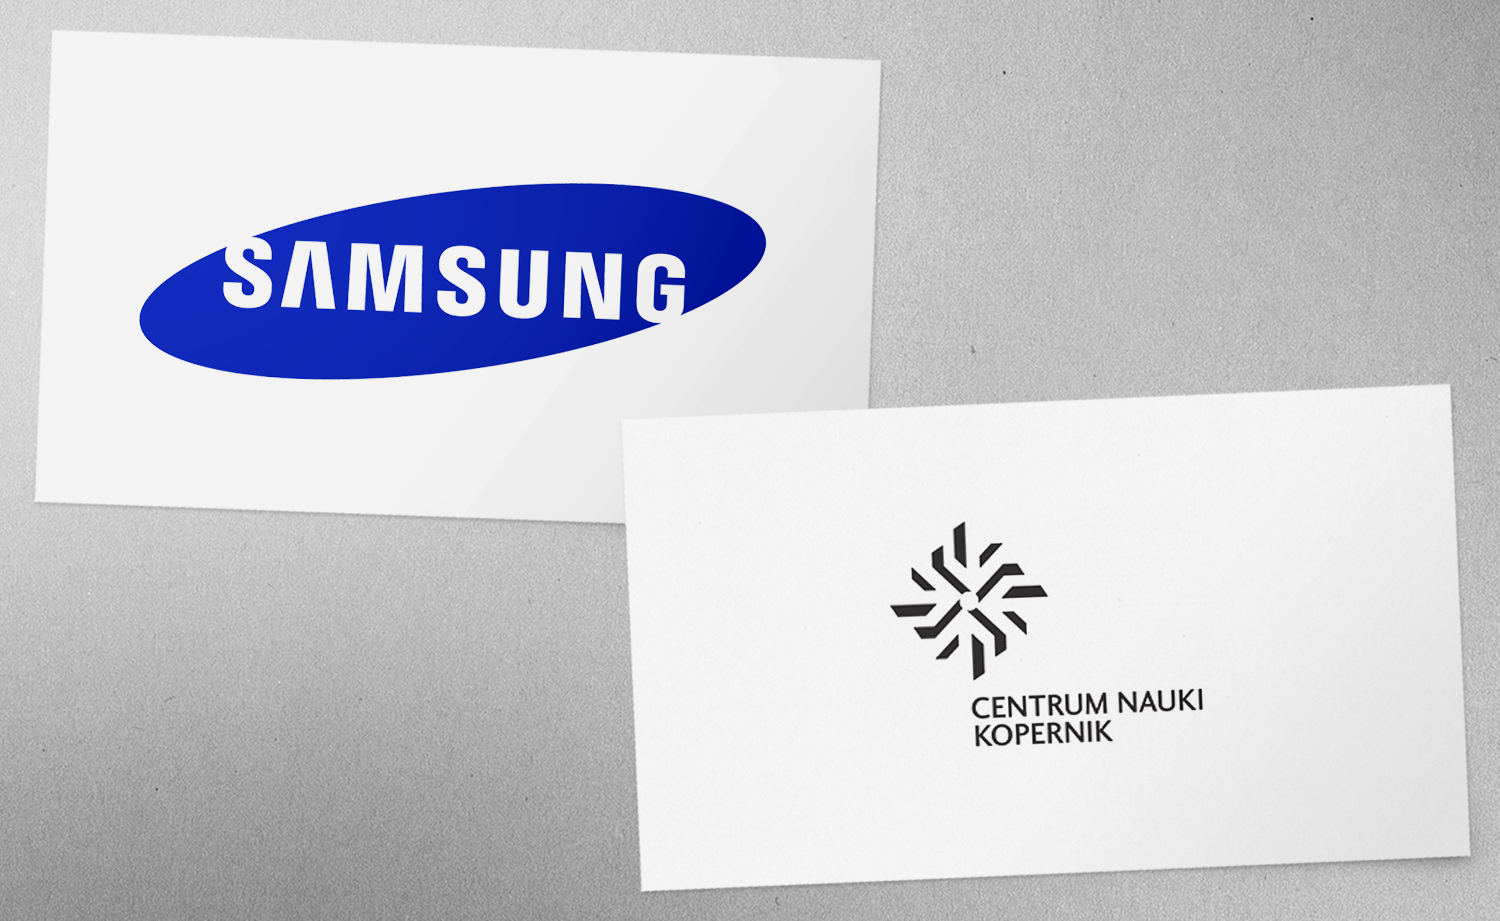 Spot for Samsung for the inauguration of CNK